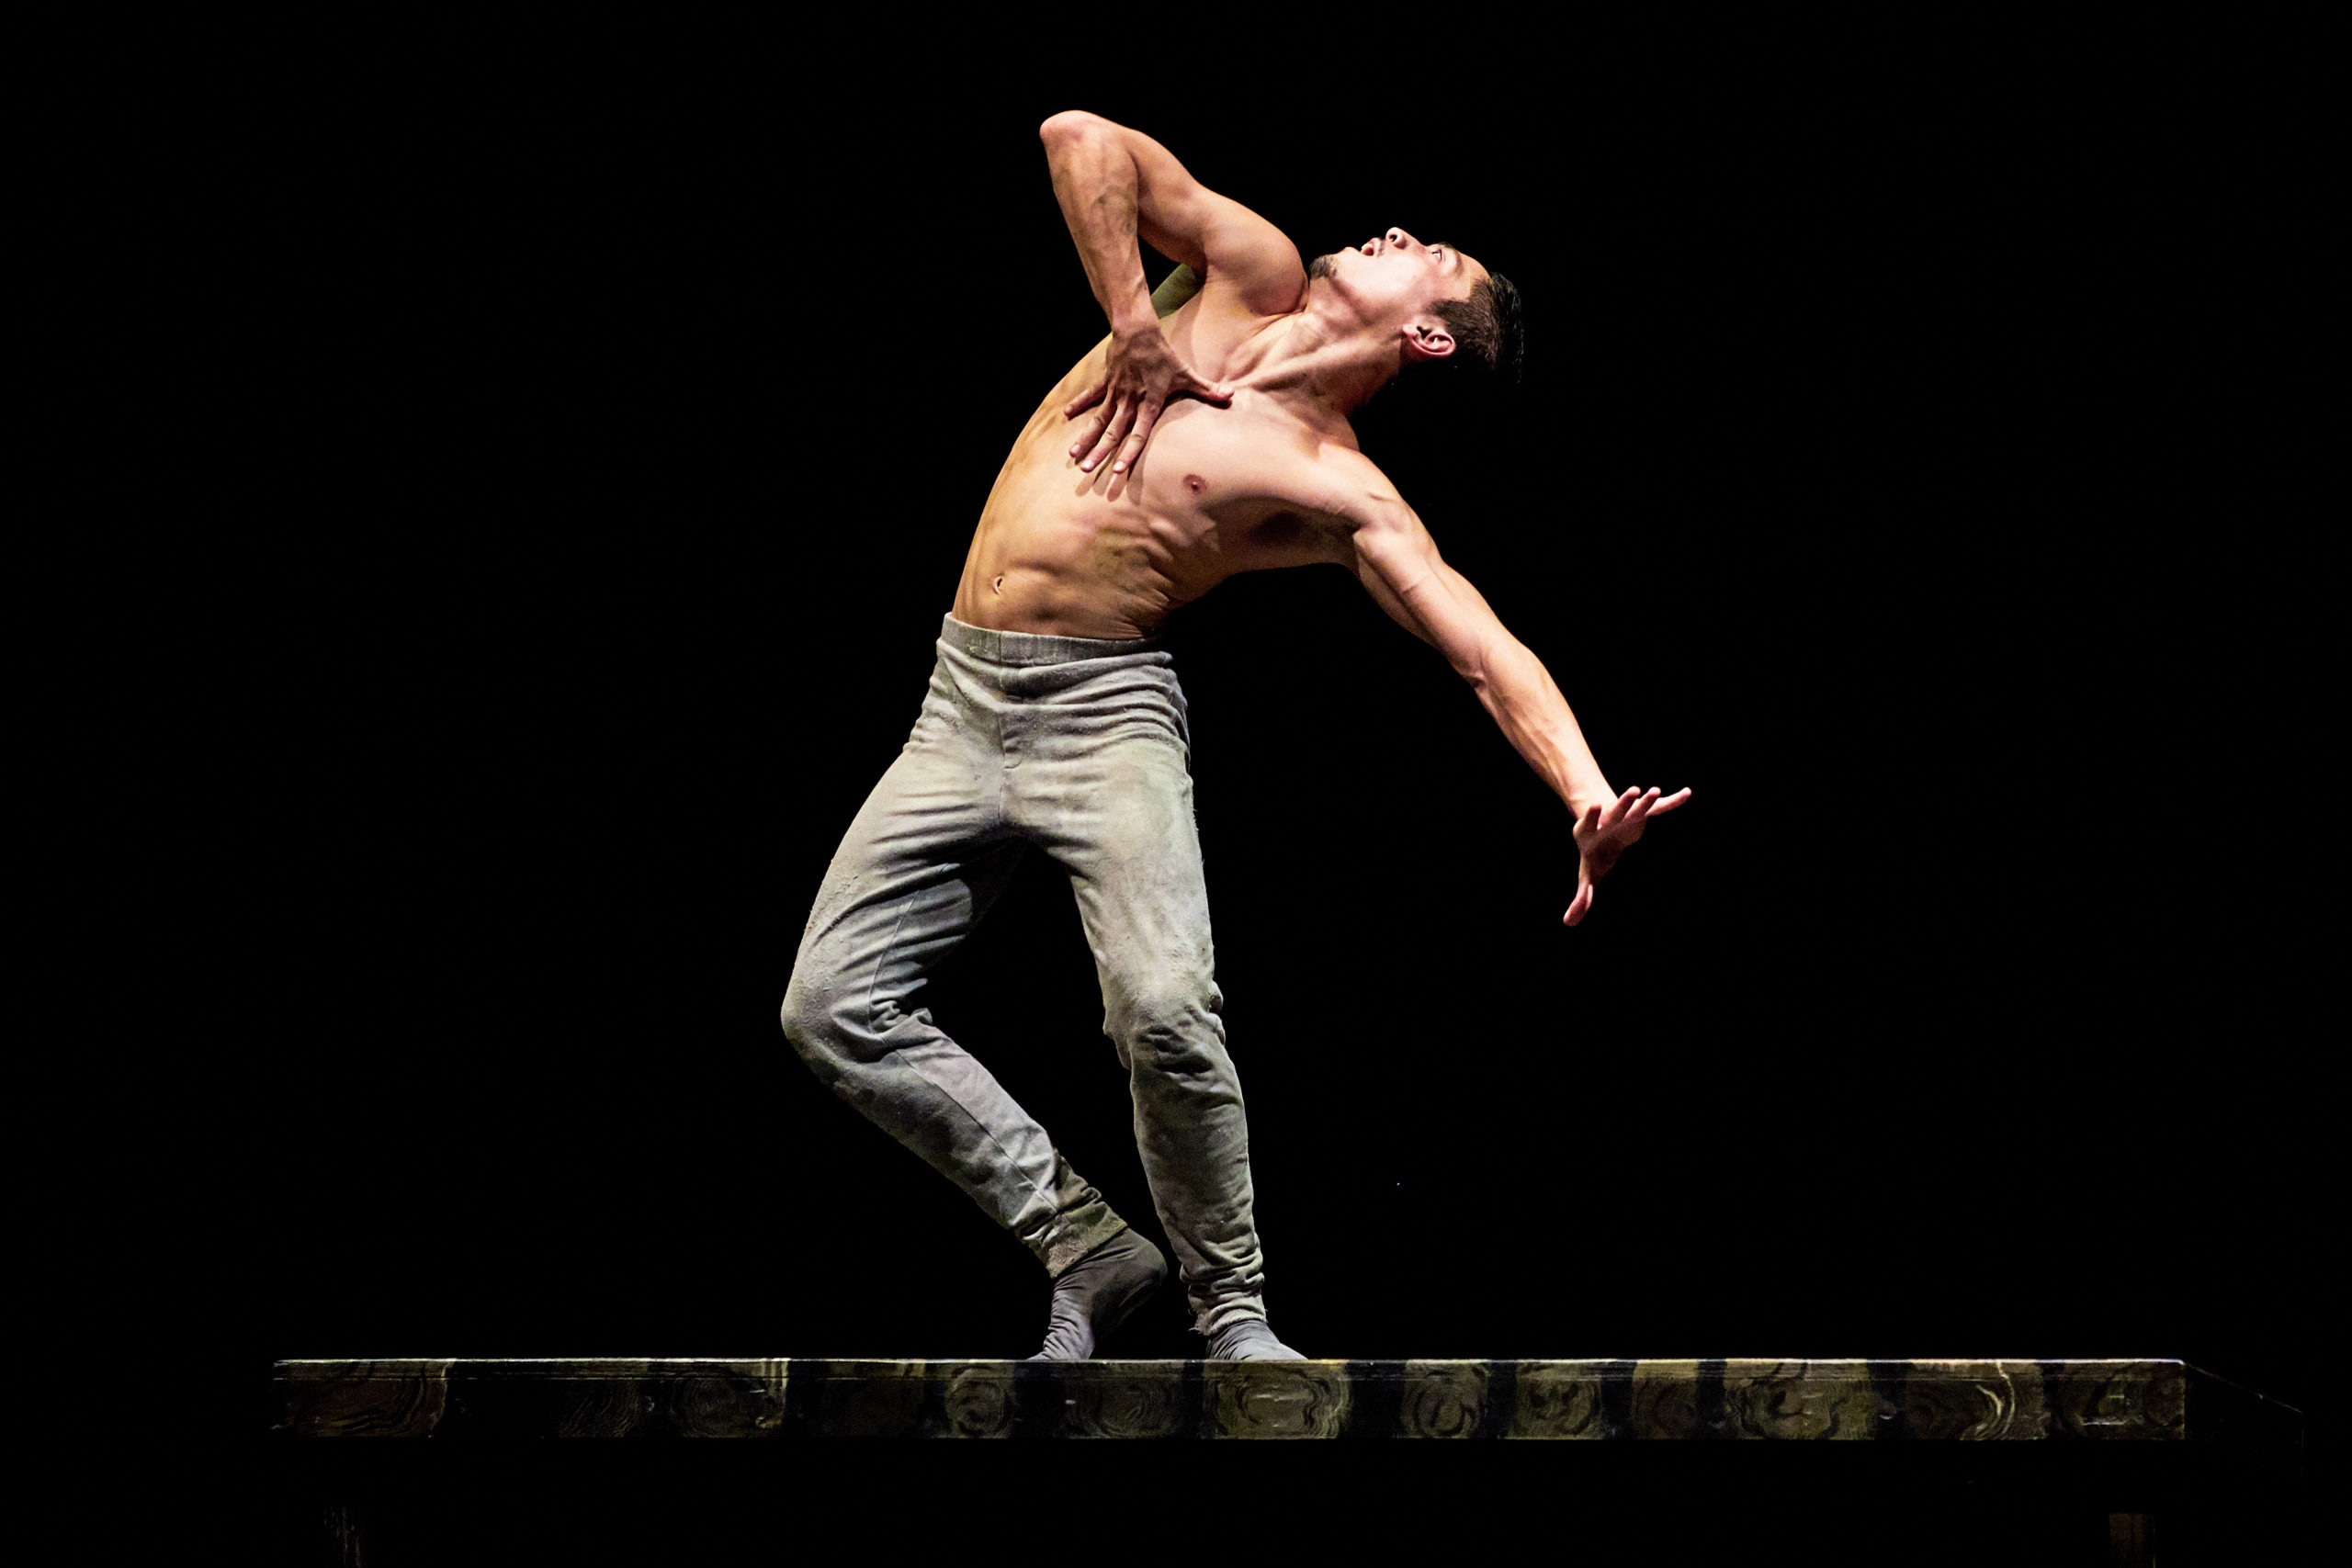 Jeffrey Cirio is shown onstage during a performance of the ballet "Creature." He is shirtless and wears gray pants and ballet shoes. Standing, he arches his body and his his head towards the right, looking at something above him. He grabds his chest with his right hand and stretches his left arm long with a flexed hand, and opens his mouth wide.